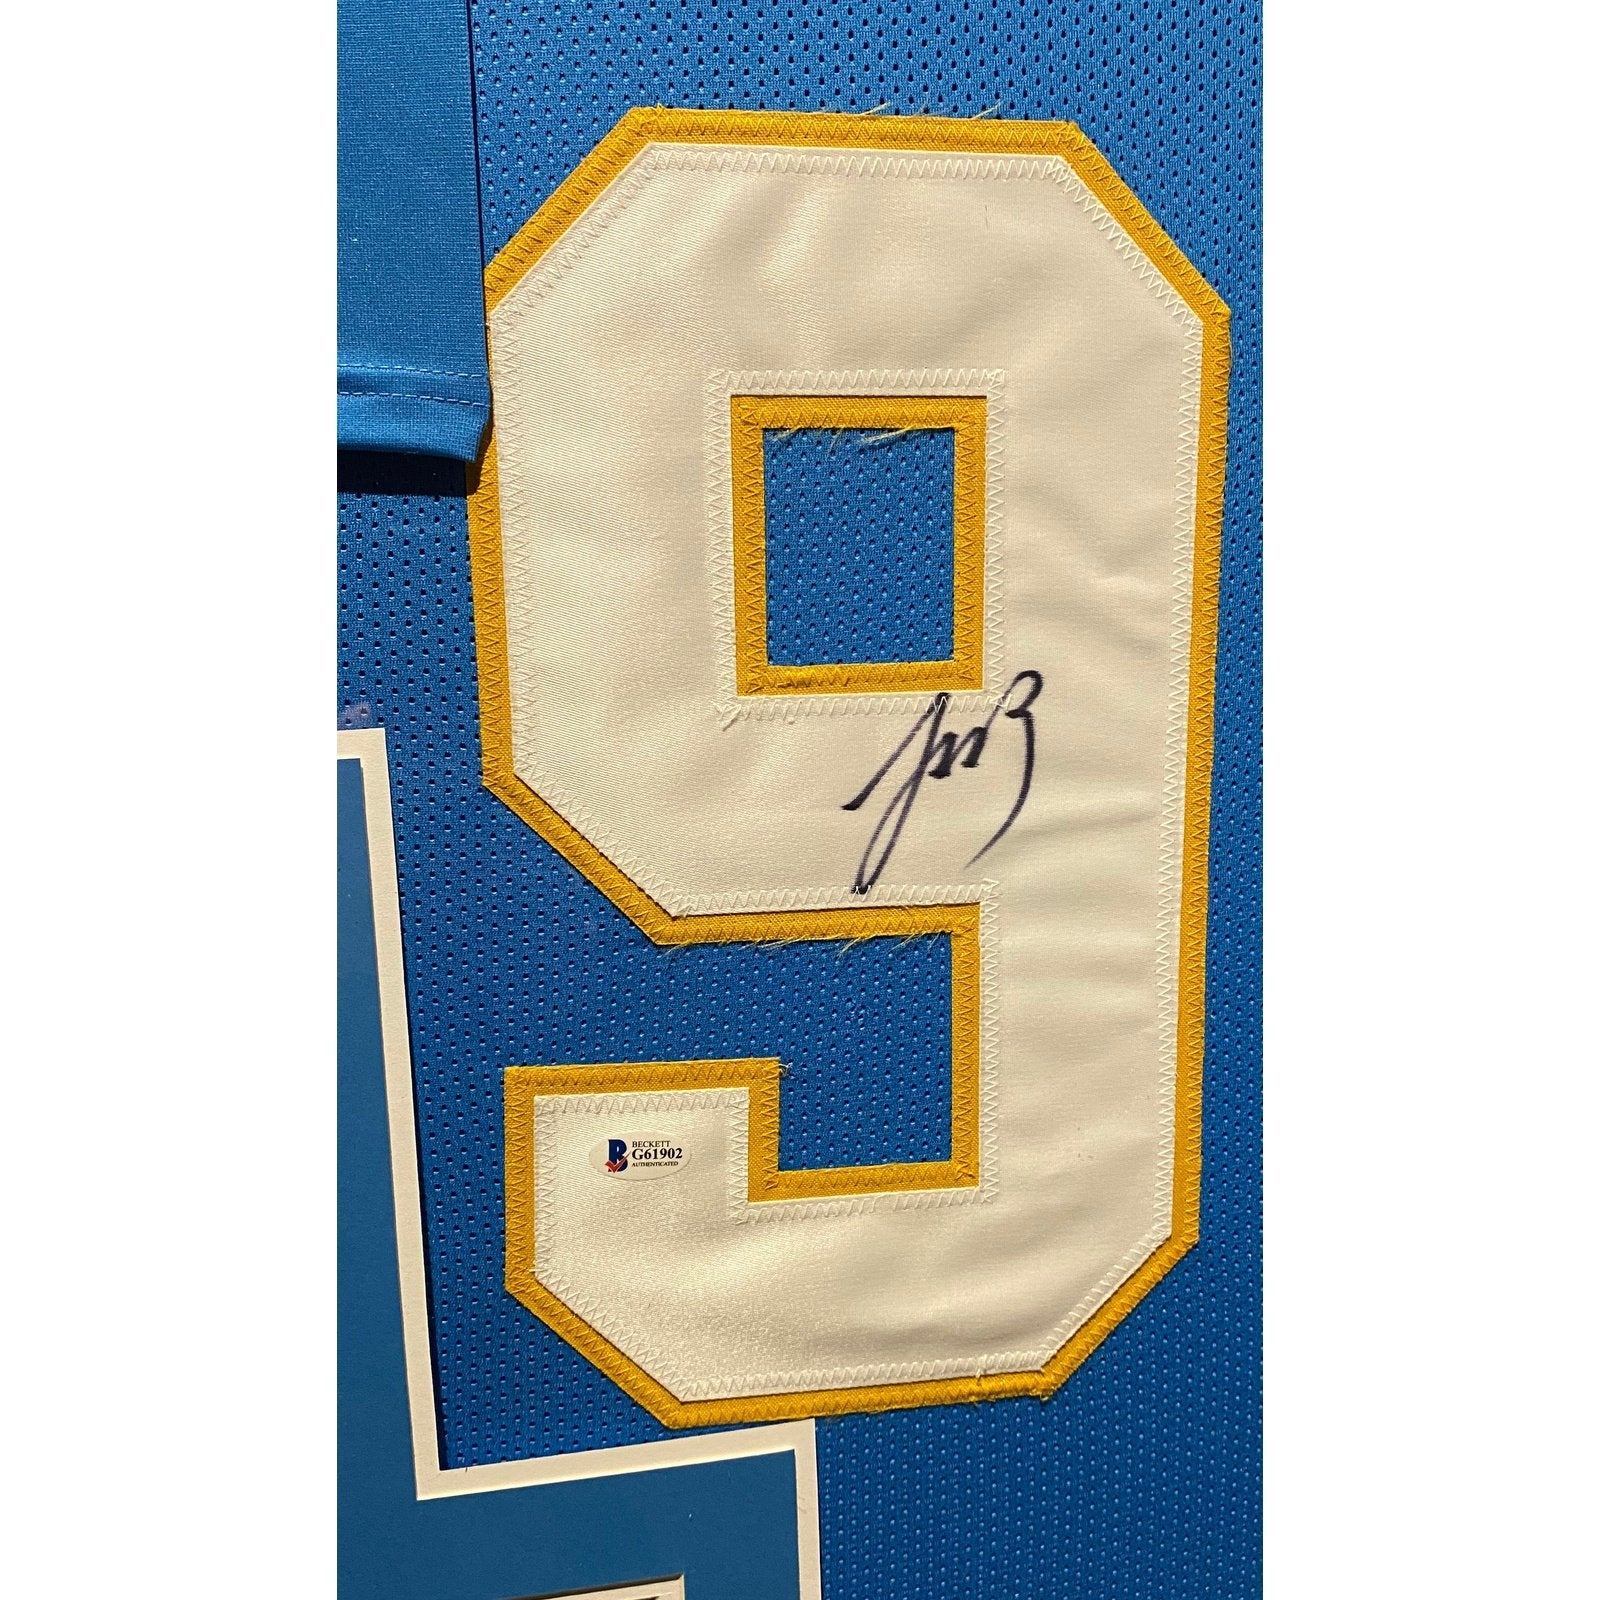 Joey Bosa Signed Framed Jersey Becket Autographed Los Angeles Chargers BAS